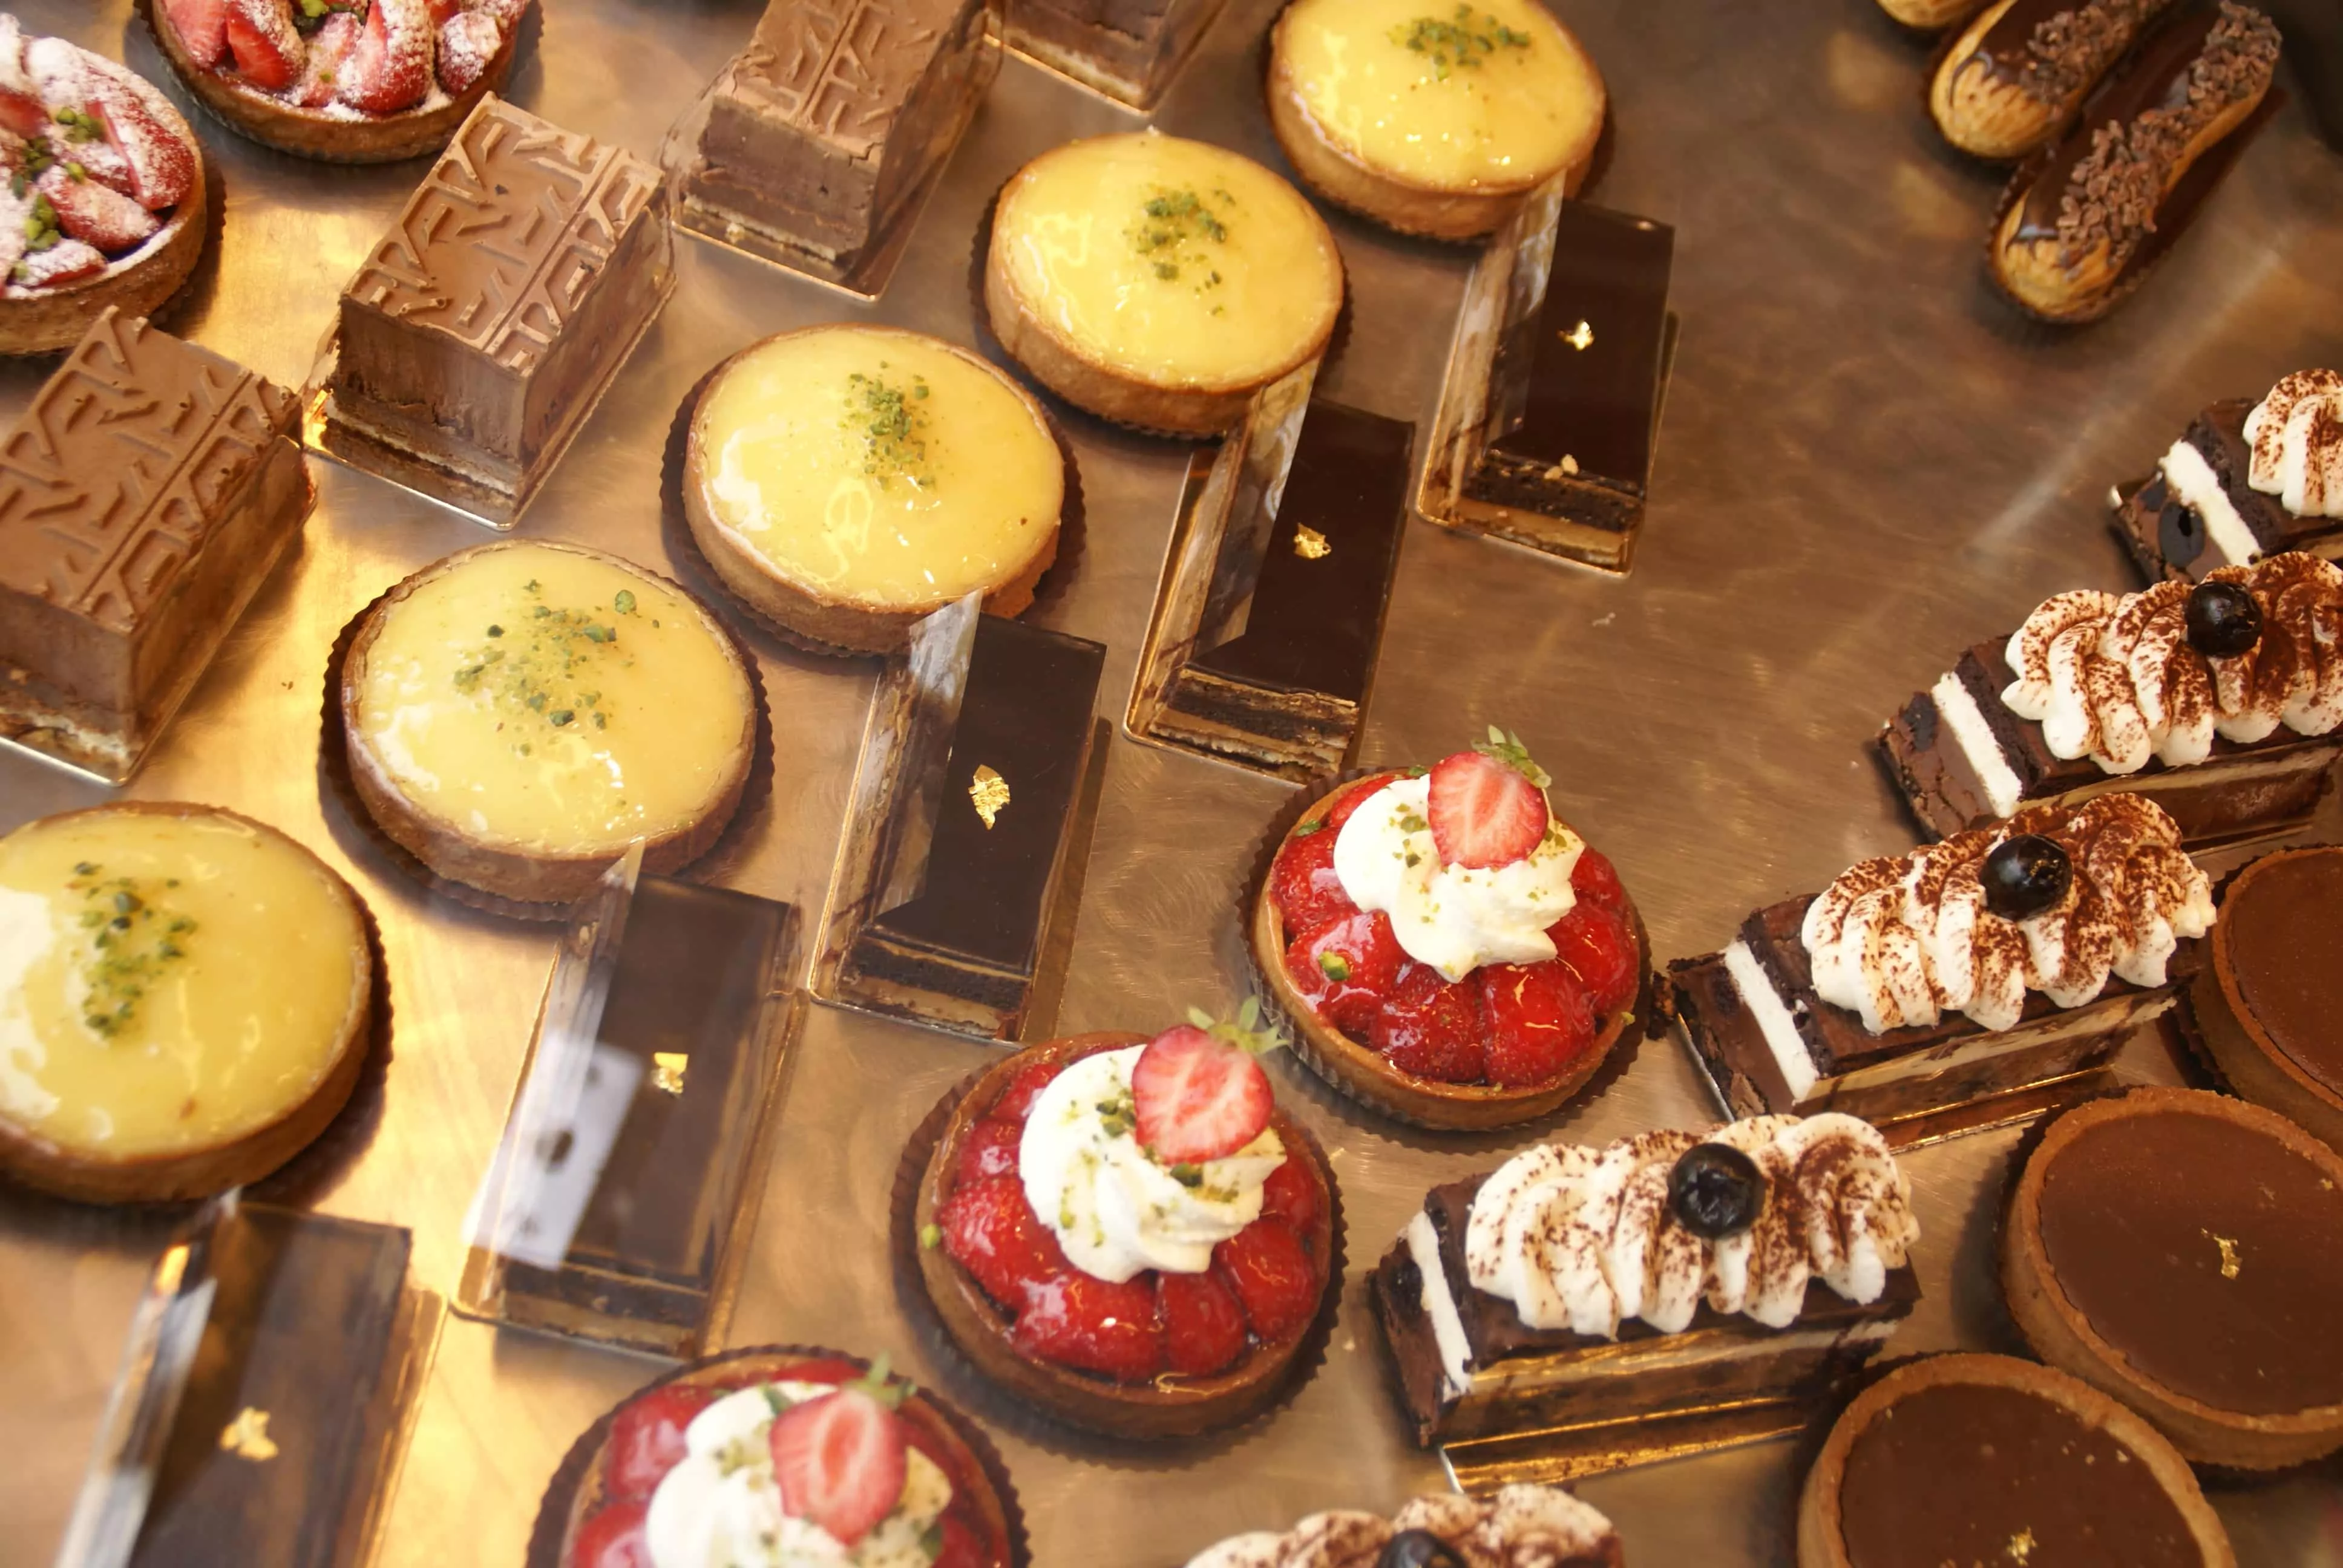 Patisserie Sadaharu Aoki in France, Europe | Confectionery & Bakeries - Rated 0.7